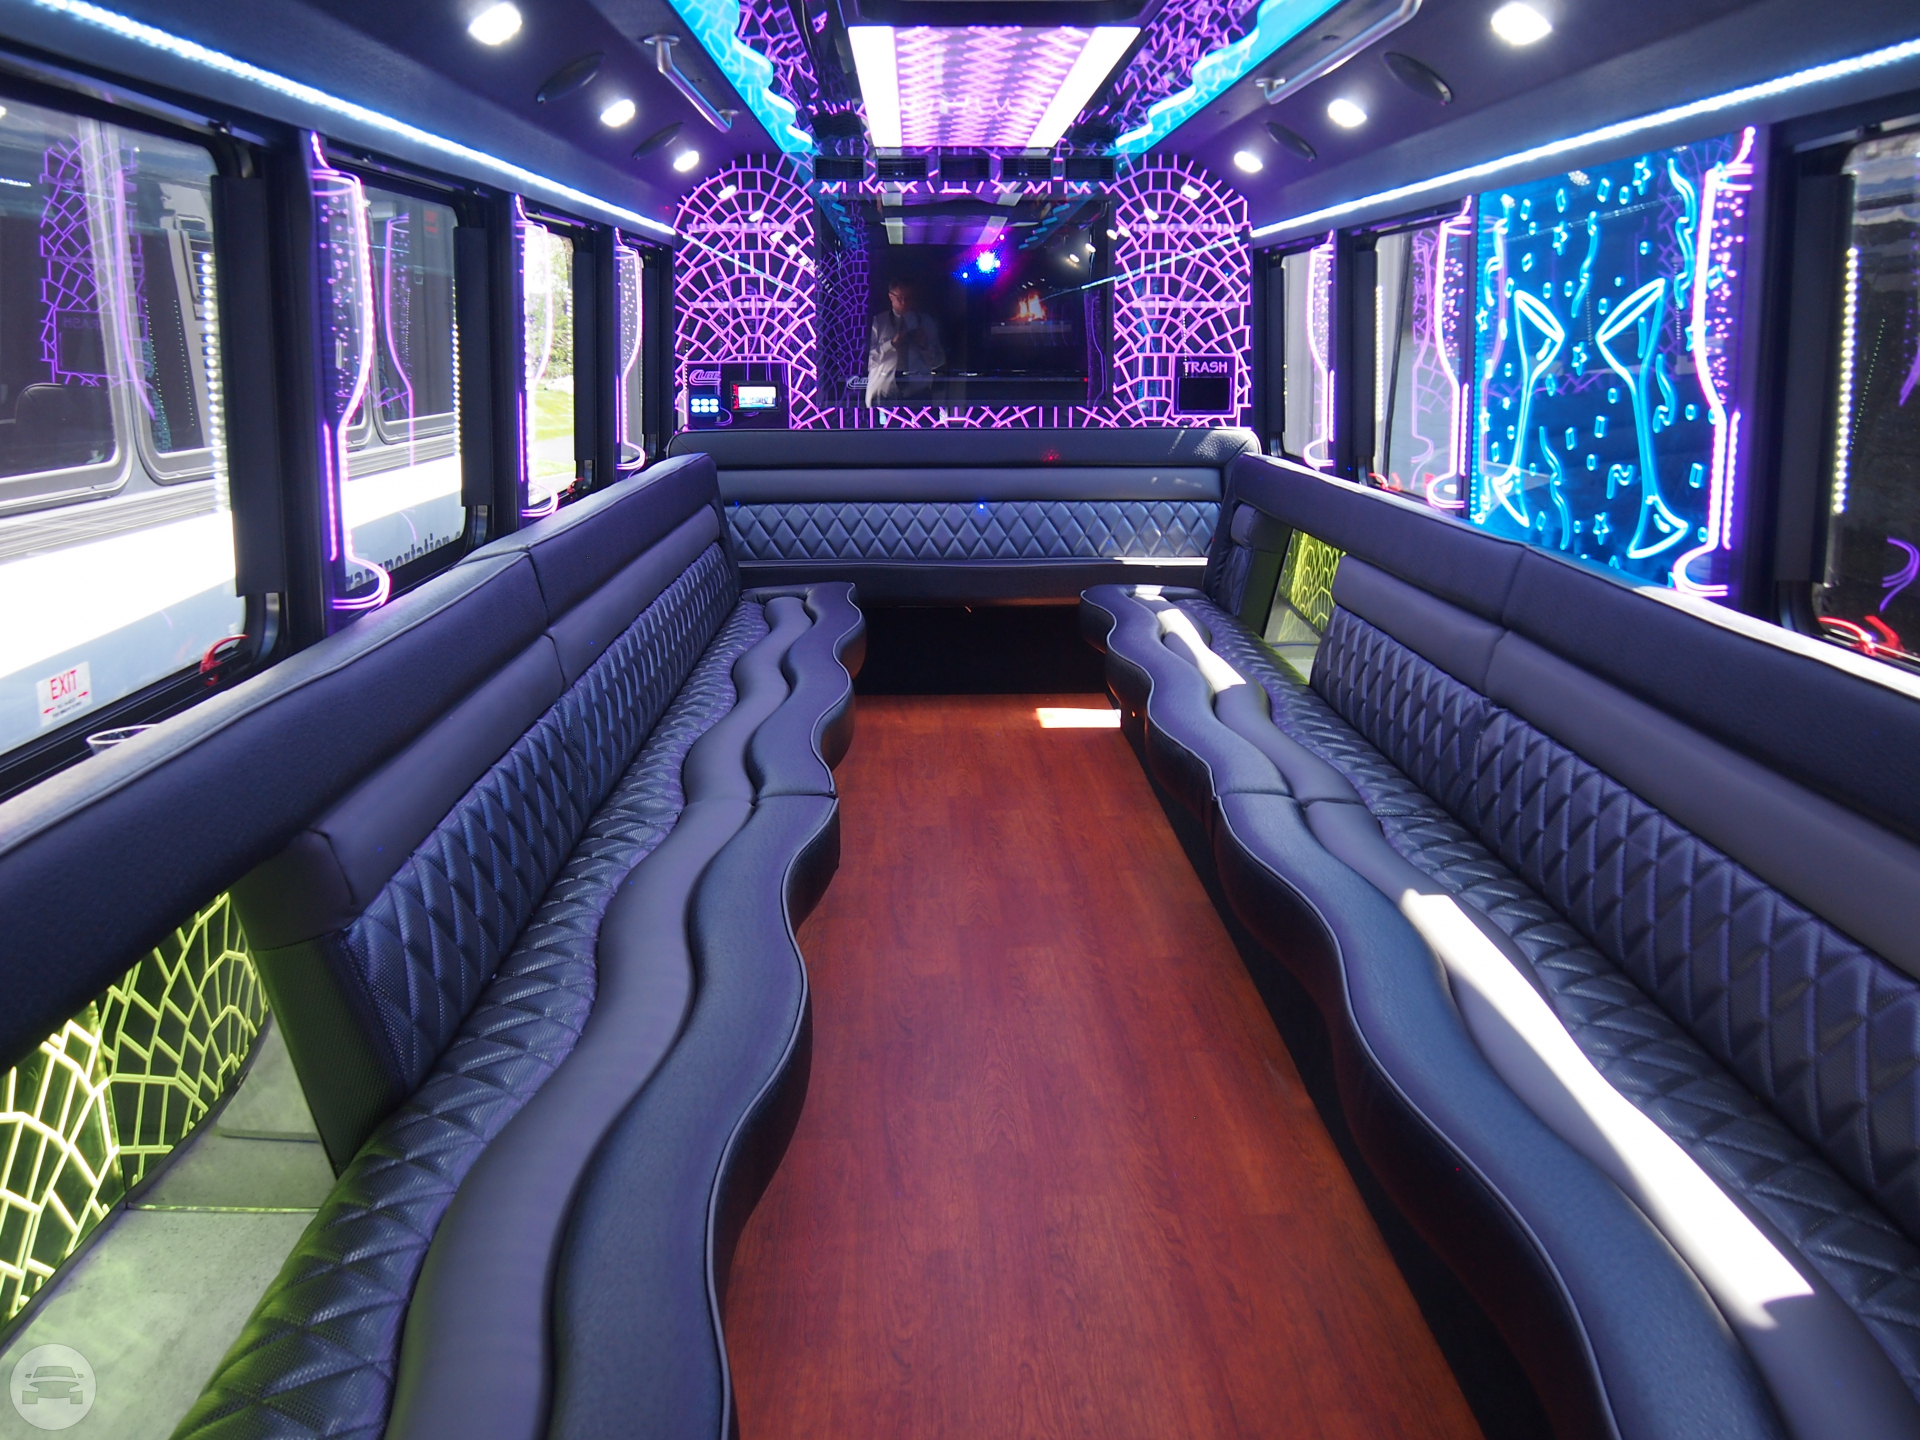 26 Passenger Party Bus
Party Limo Bus /
Easton, PA

 / Hourly $0.00
